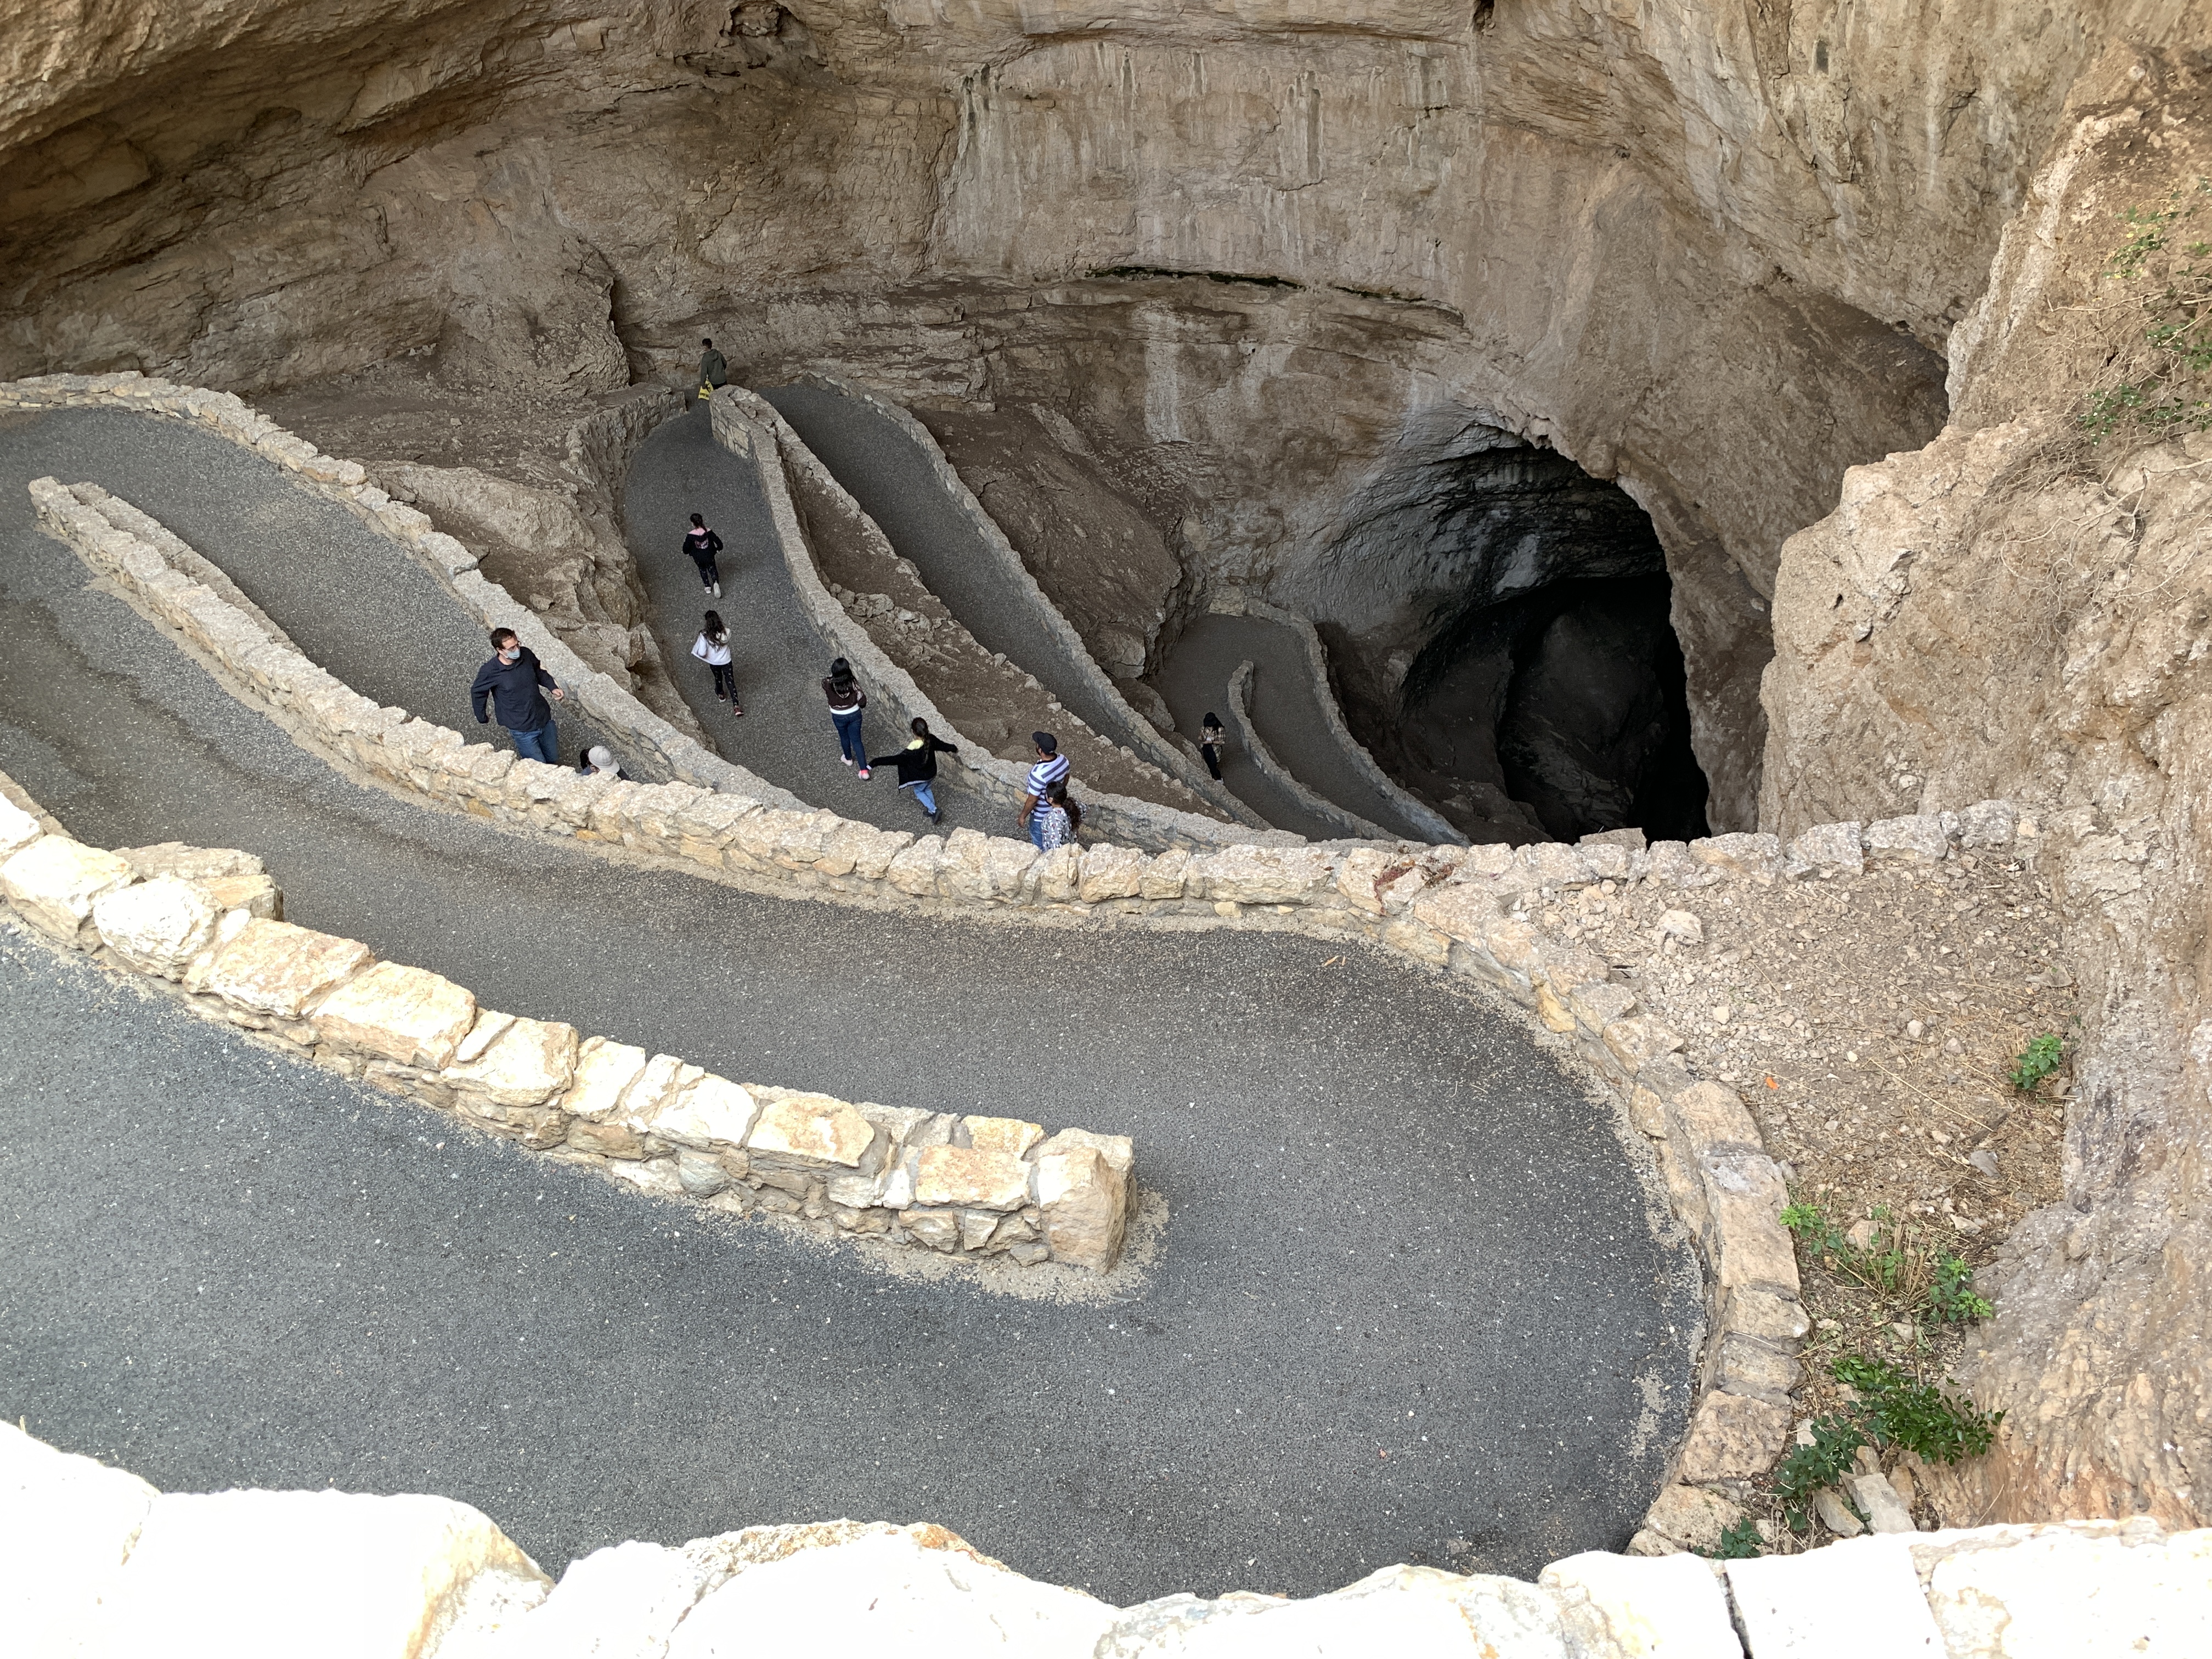 Beginning the switchback path down into the cavern at Carlsbad Caverns National Park